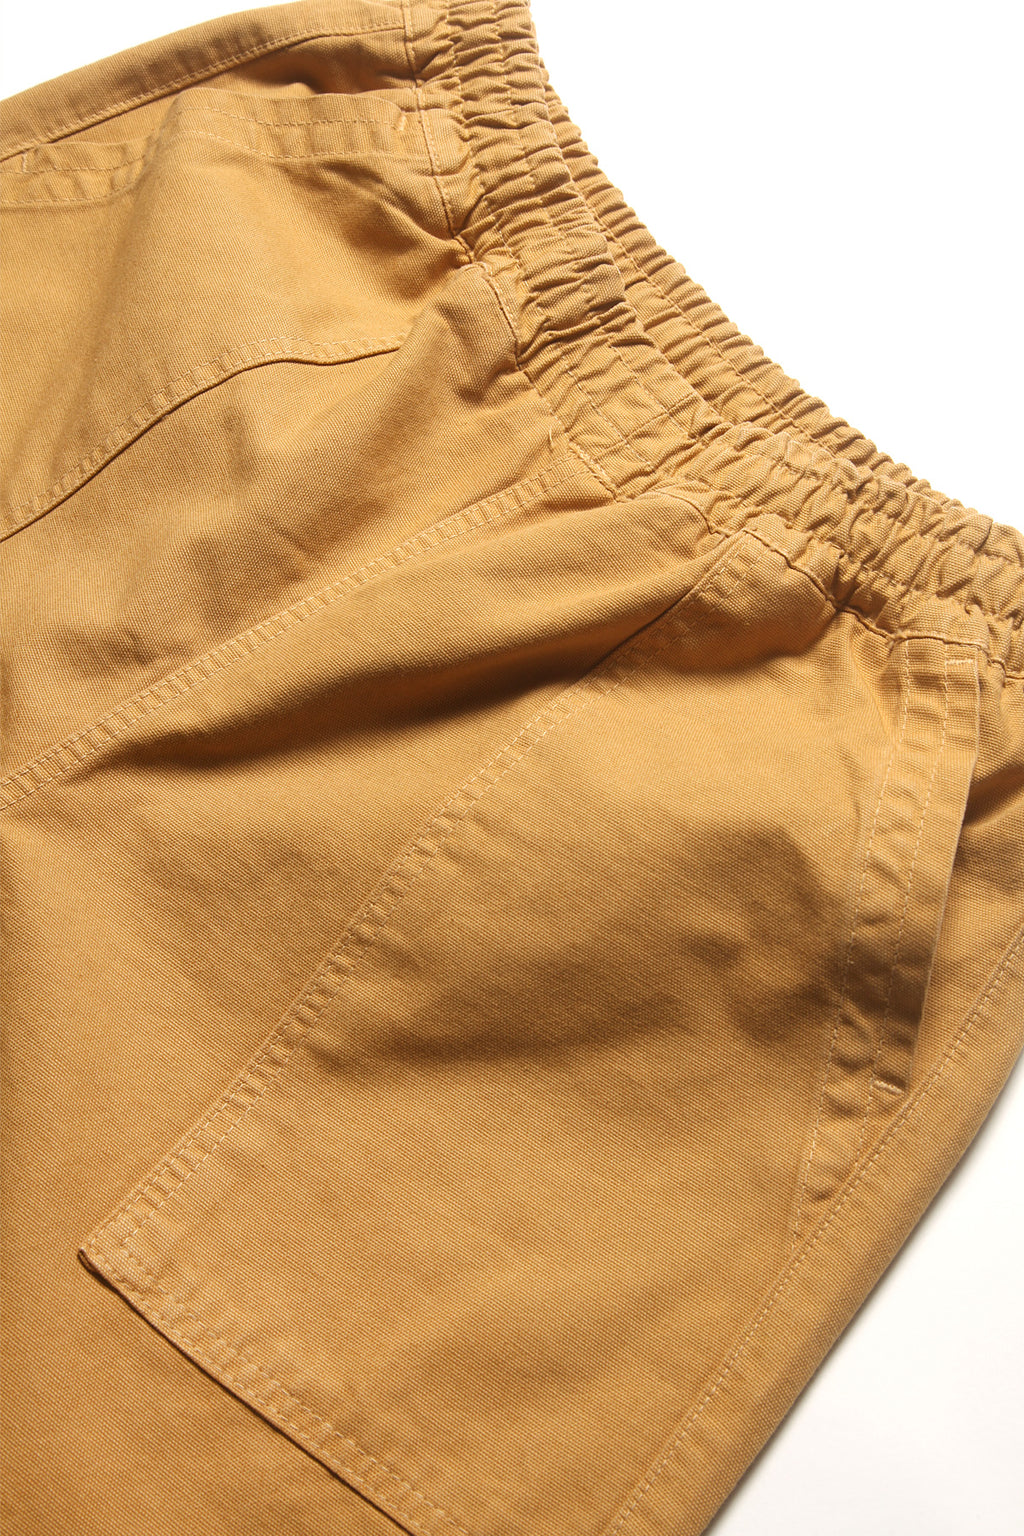 Service Works - Classic Chef Shorts - Tan